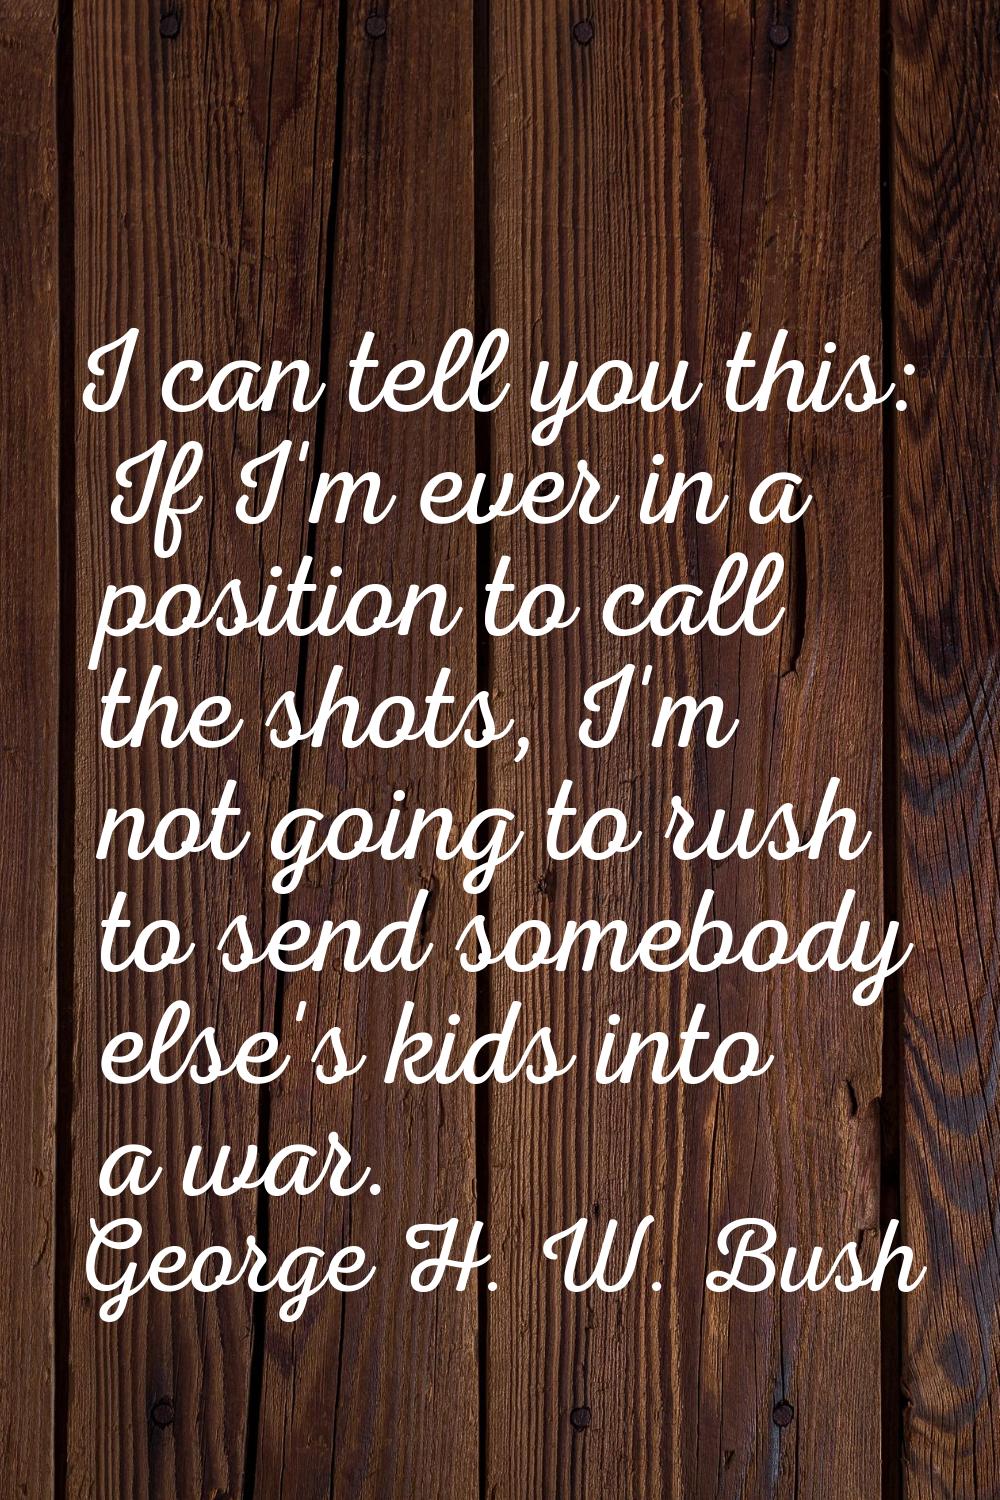 I can tell you this: If I'm ever in a position to call the shots, I'm not going to rush to send som